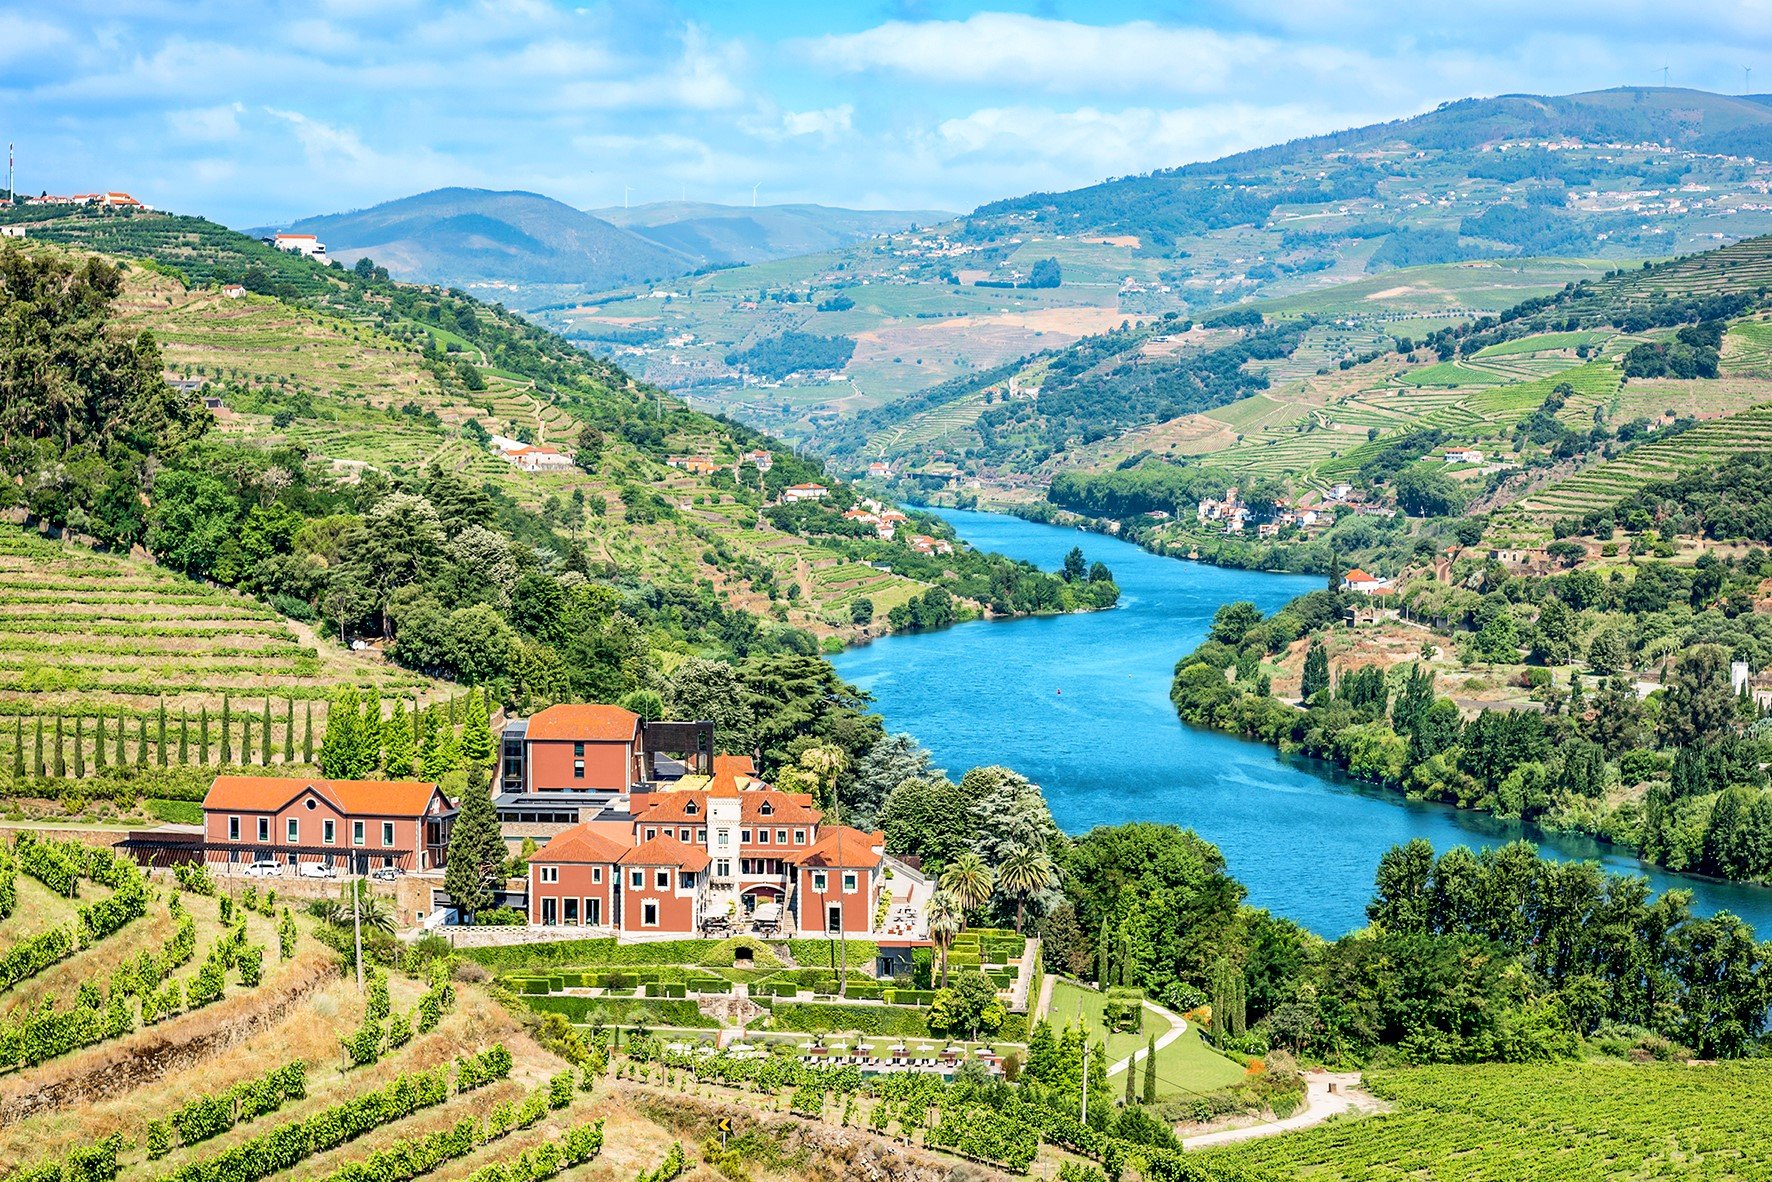 Portugal, the World's Best Destination for Travel